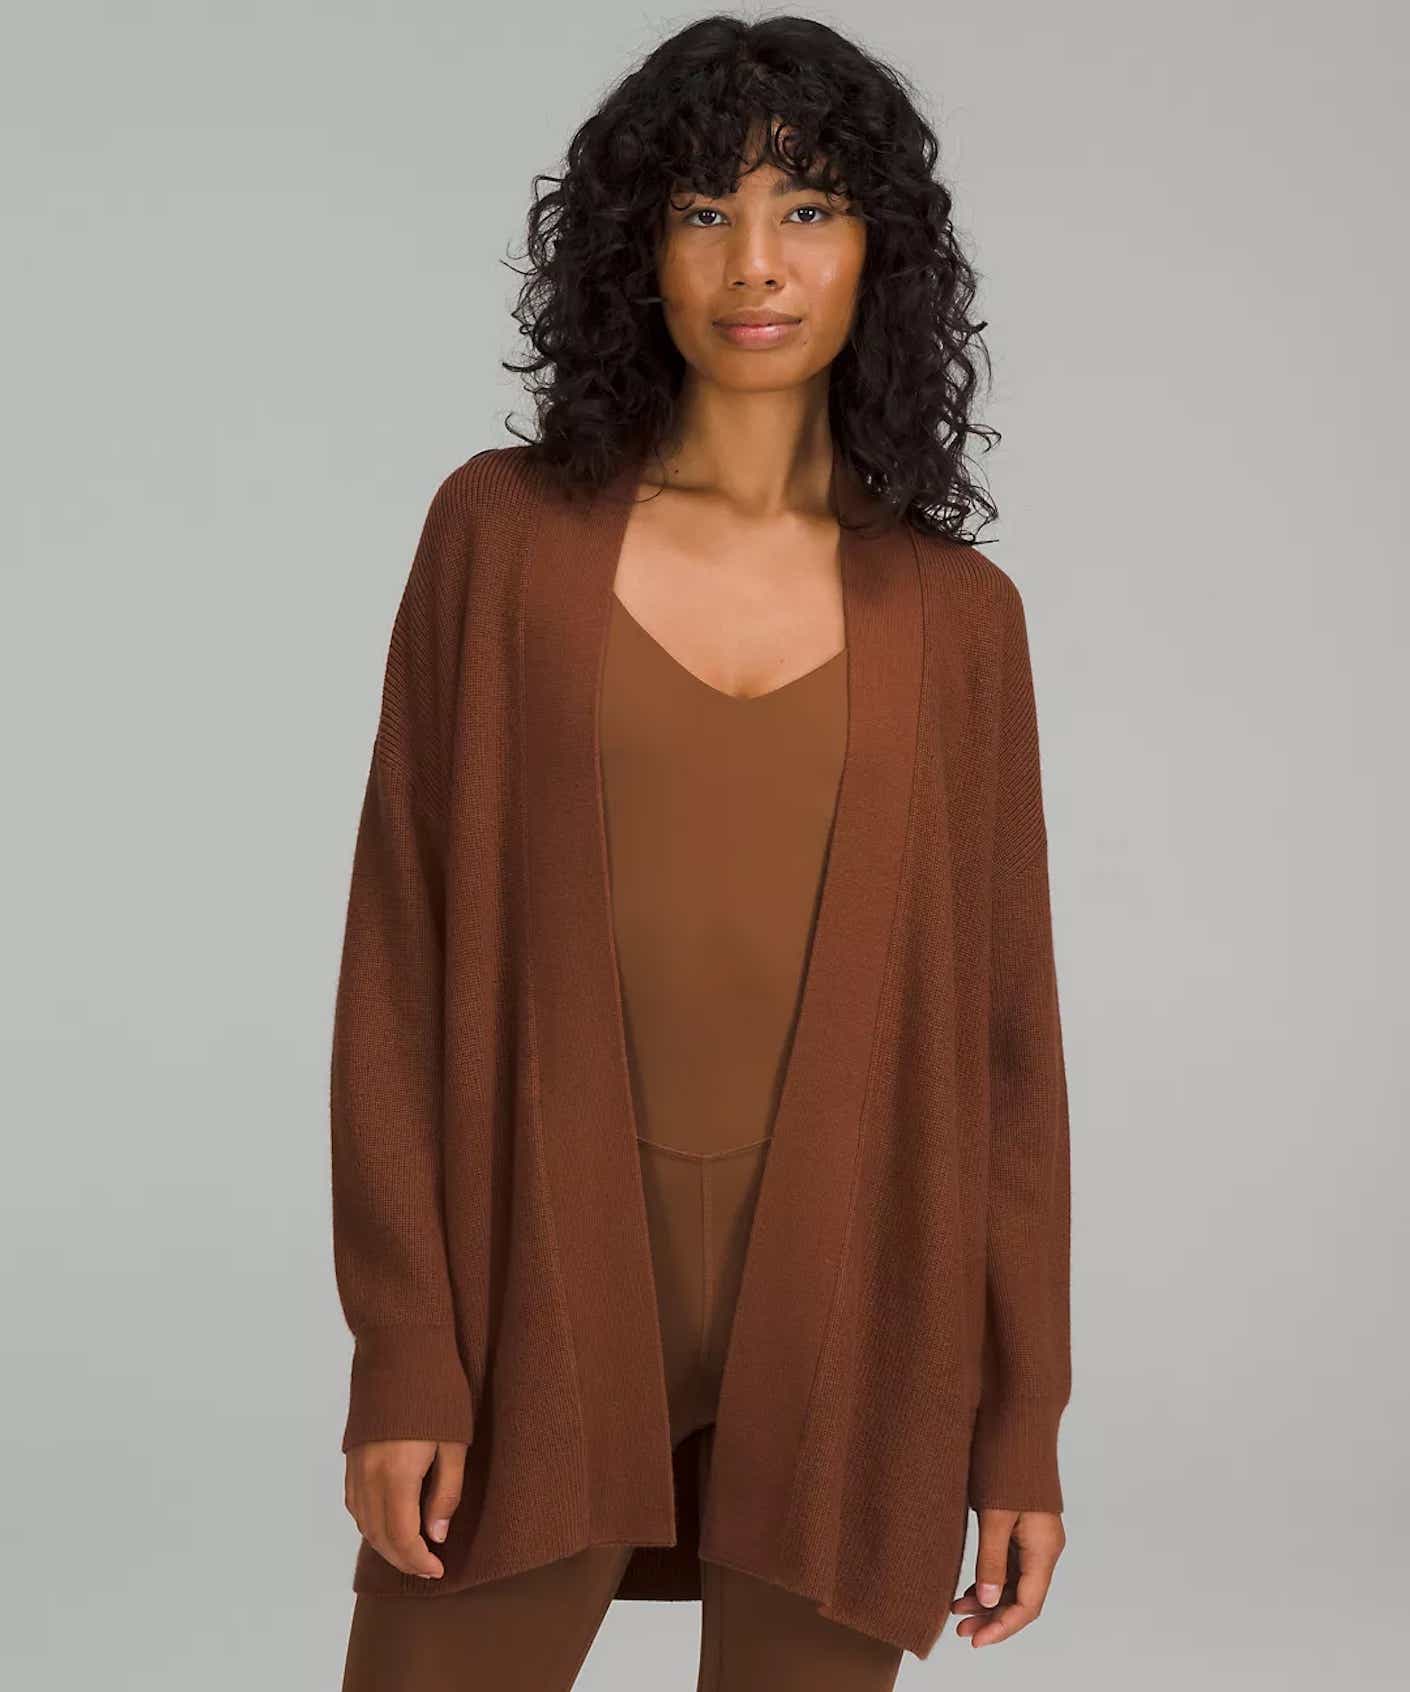 A woman wears a brown top and brown leggings underneath a brown cardigan sweater with a draped open front.